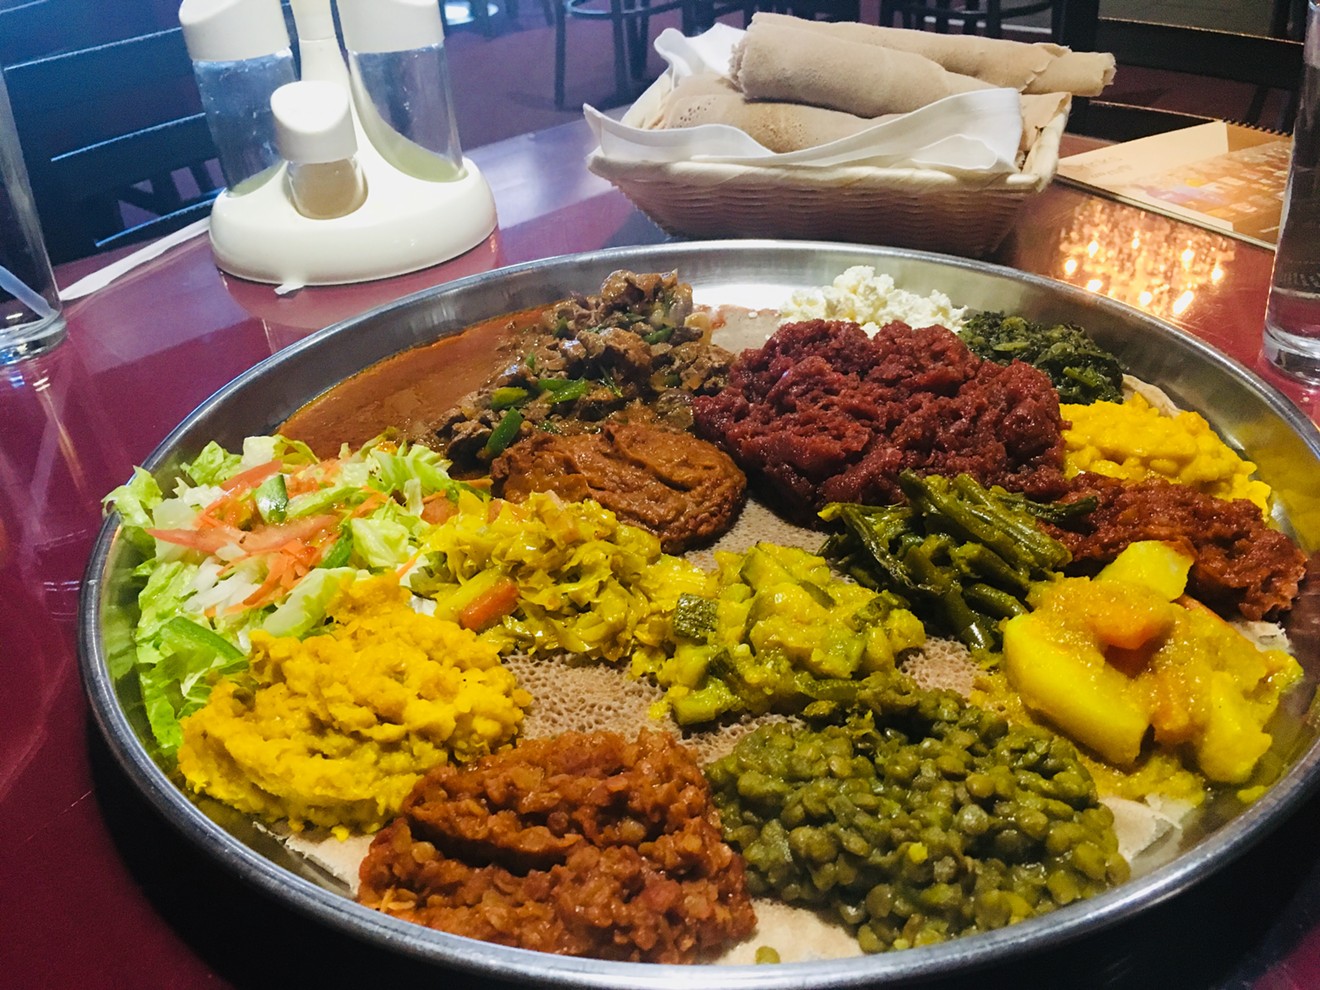 The food and the scene at the Nile Ethiopian Restaurant are equally vibrant.